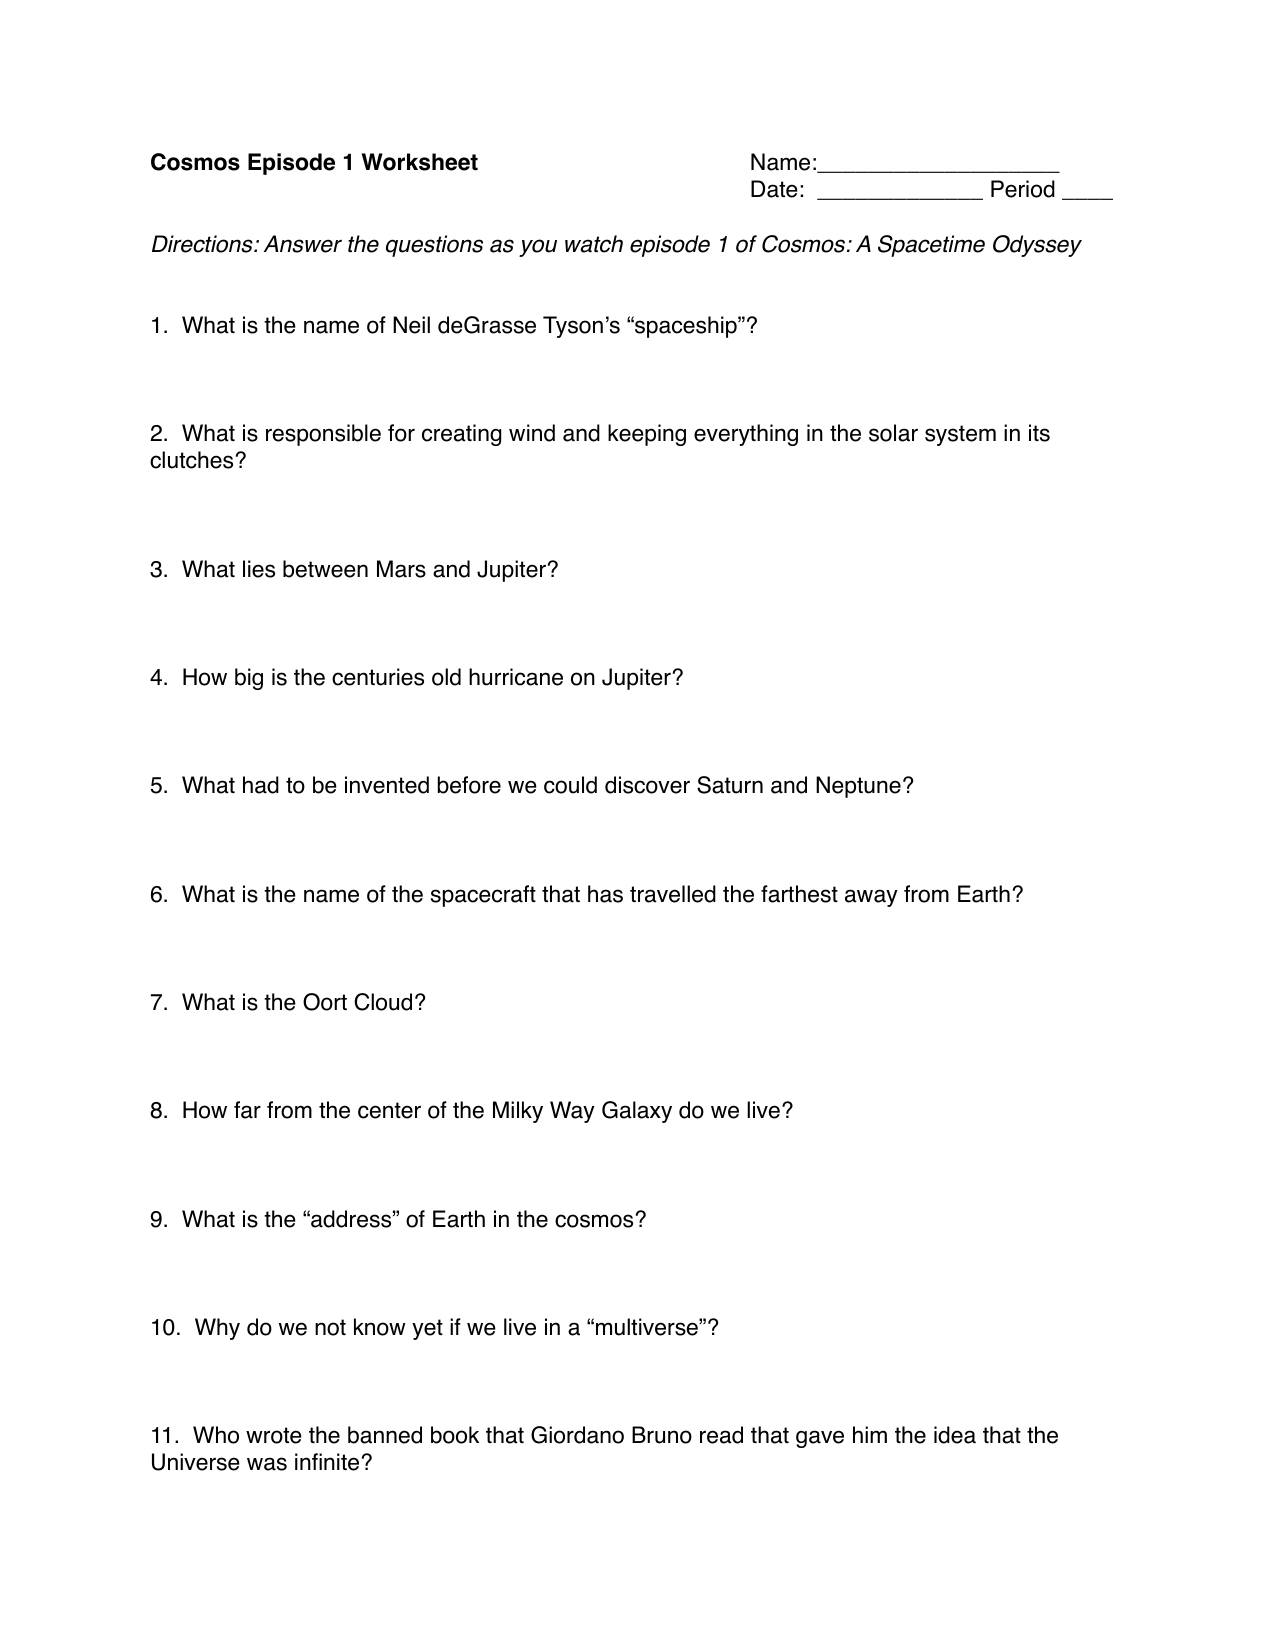 Cosmos Episode 11 Within Cosmos Episode 1 Worksheet Answers